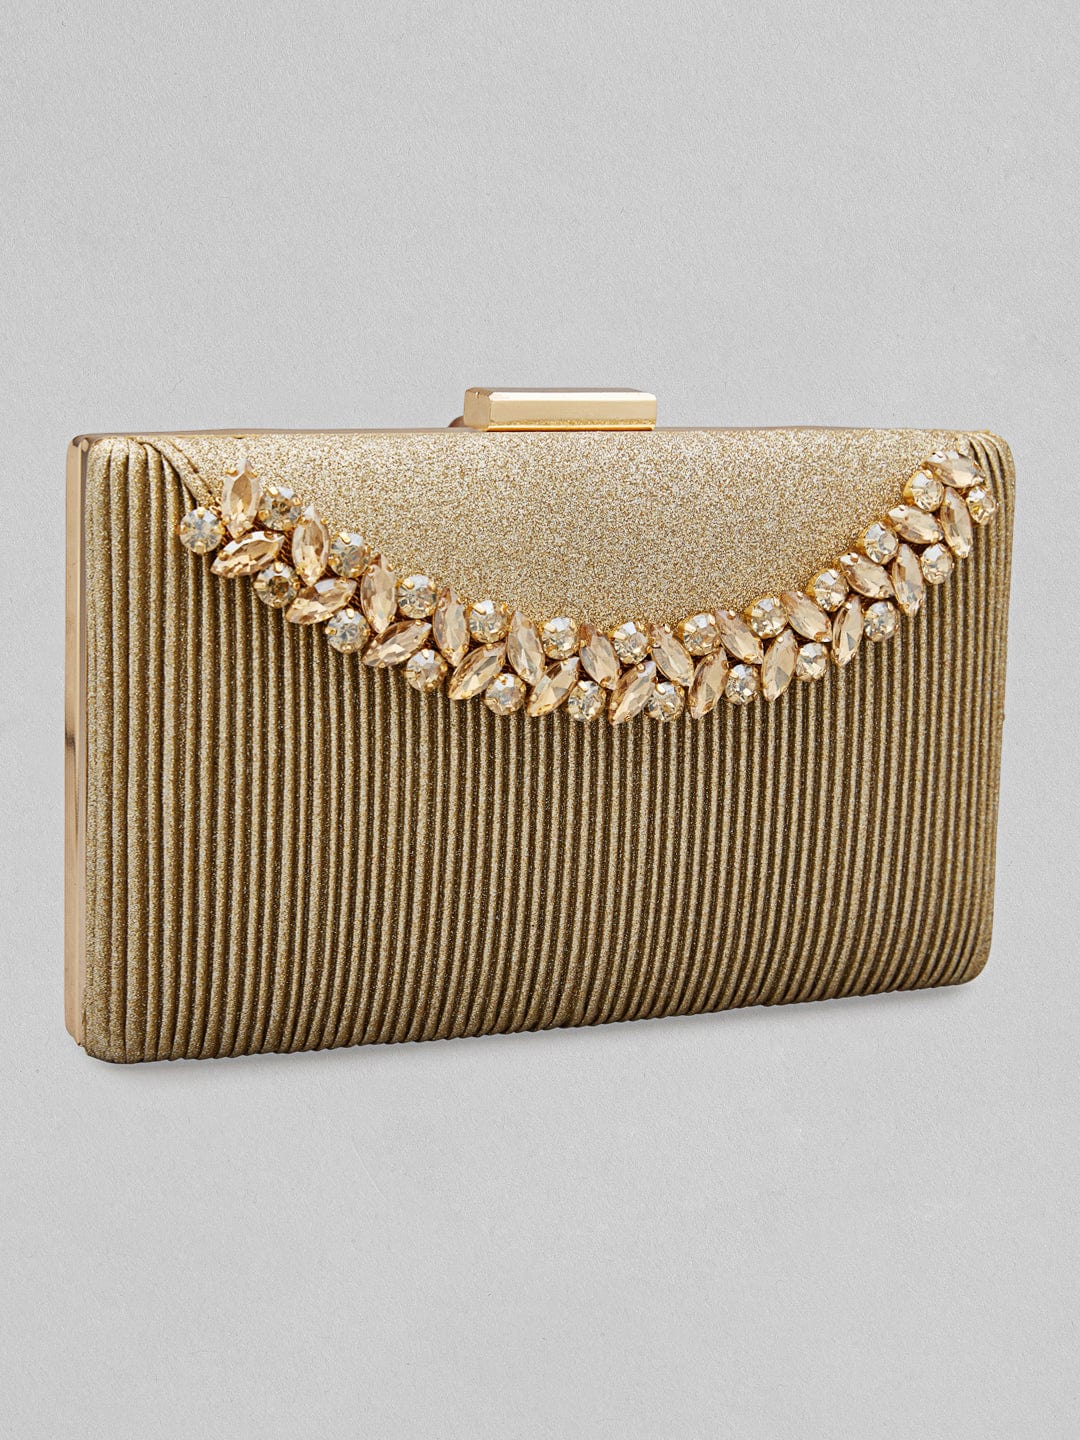 Metal Golden Clutch Purses, Style : Modern, Occasion : Party Wear at Best  Price in Mumbai